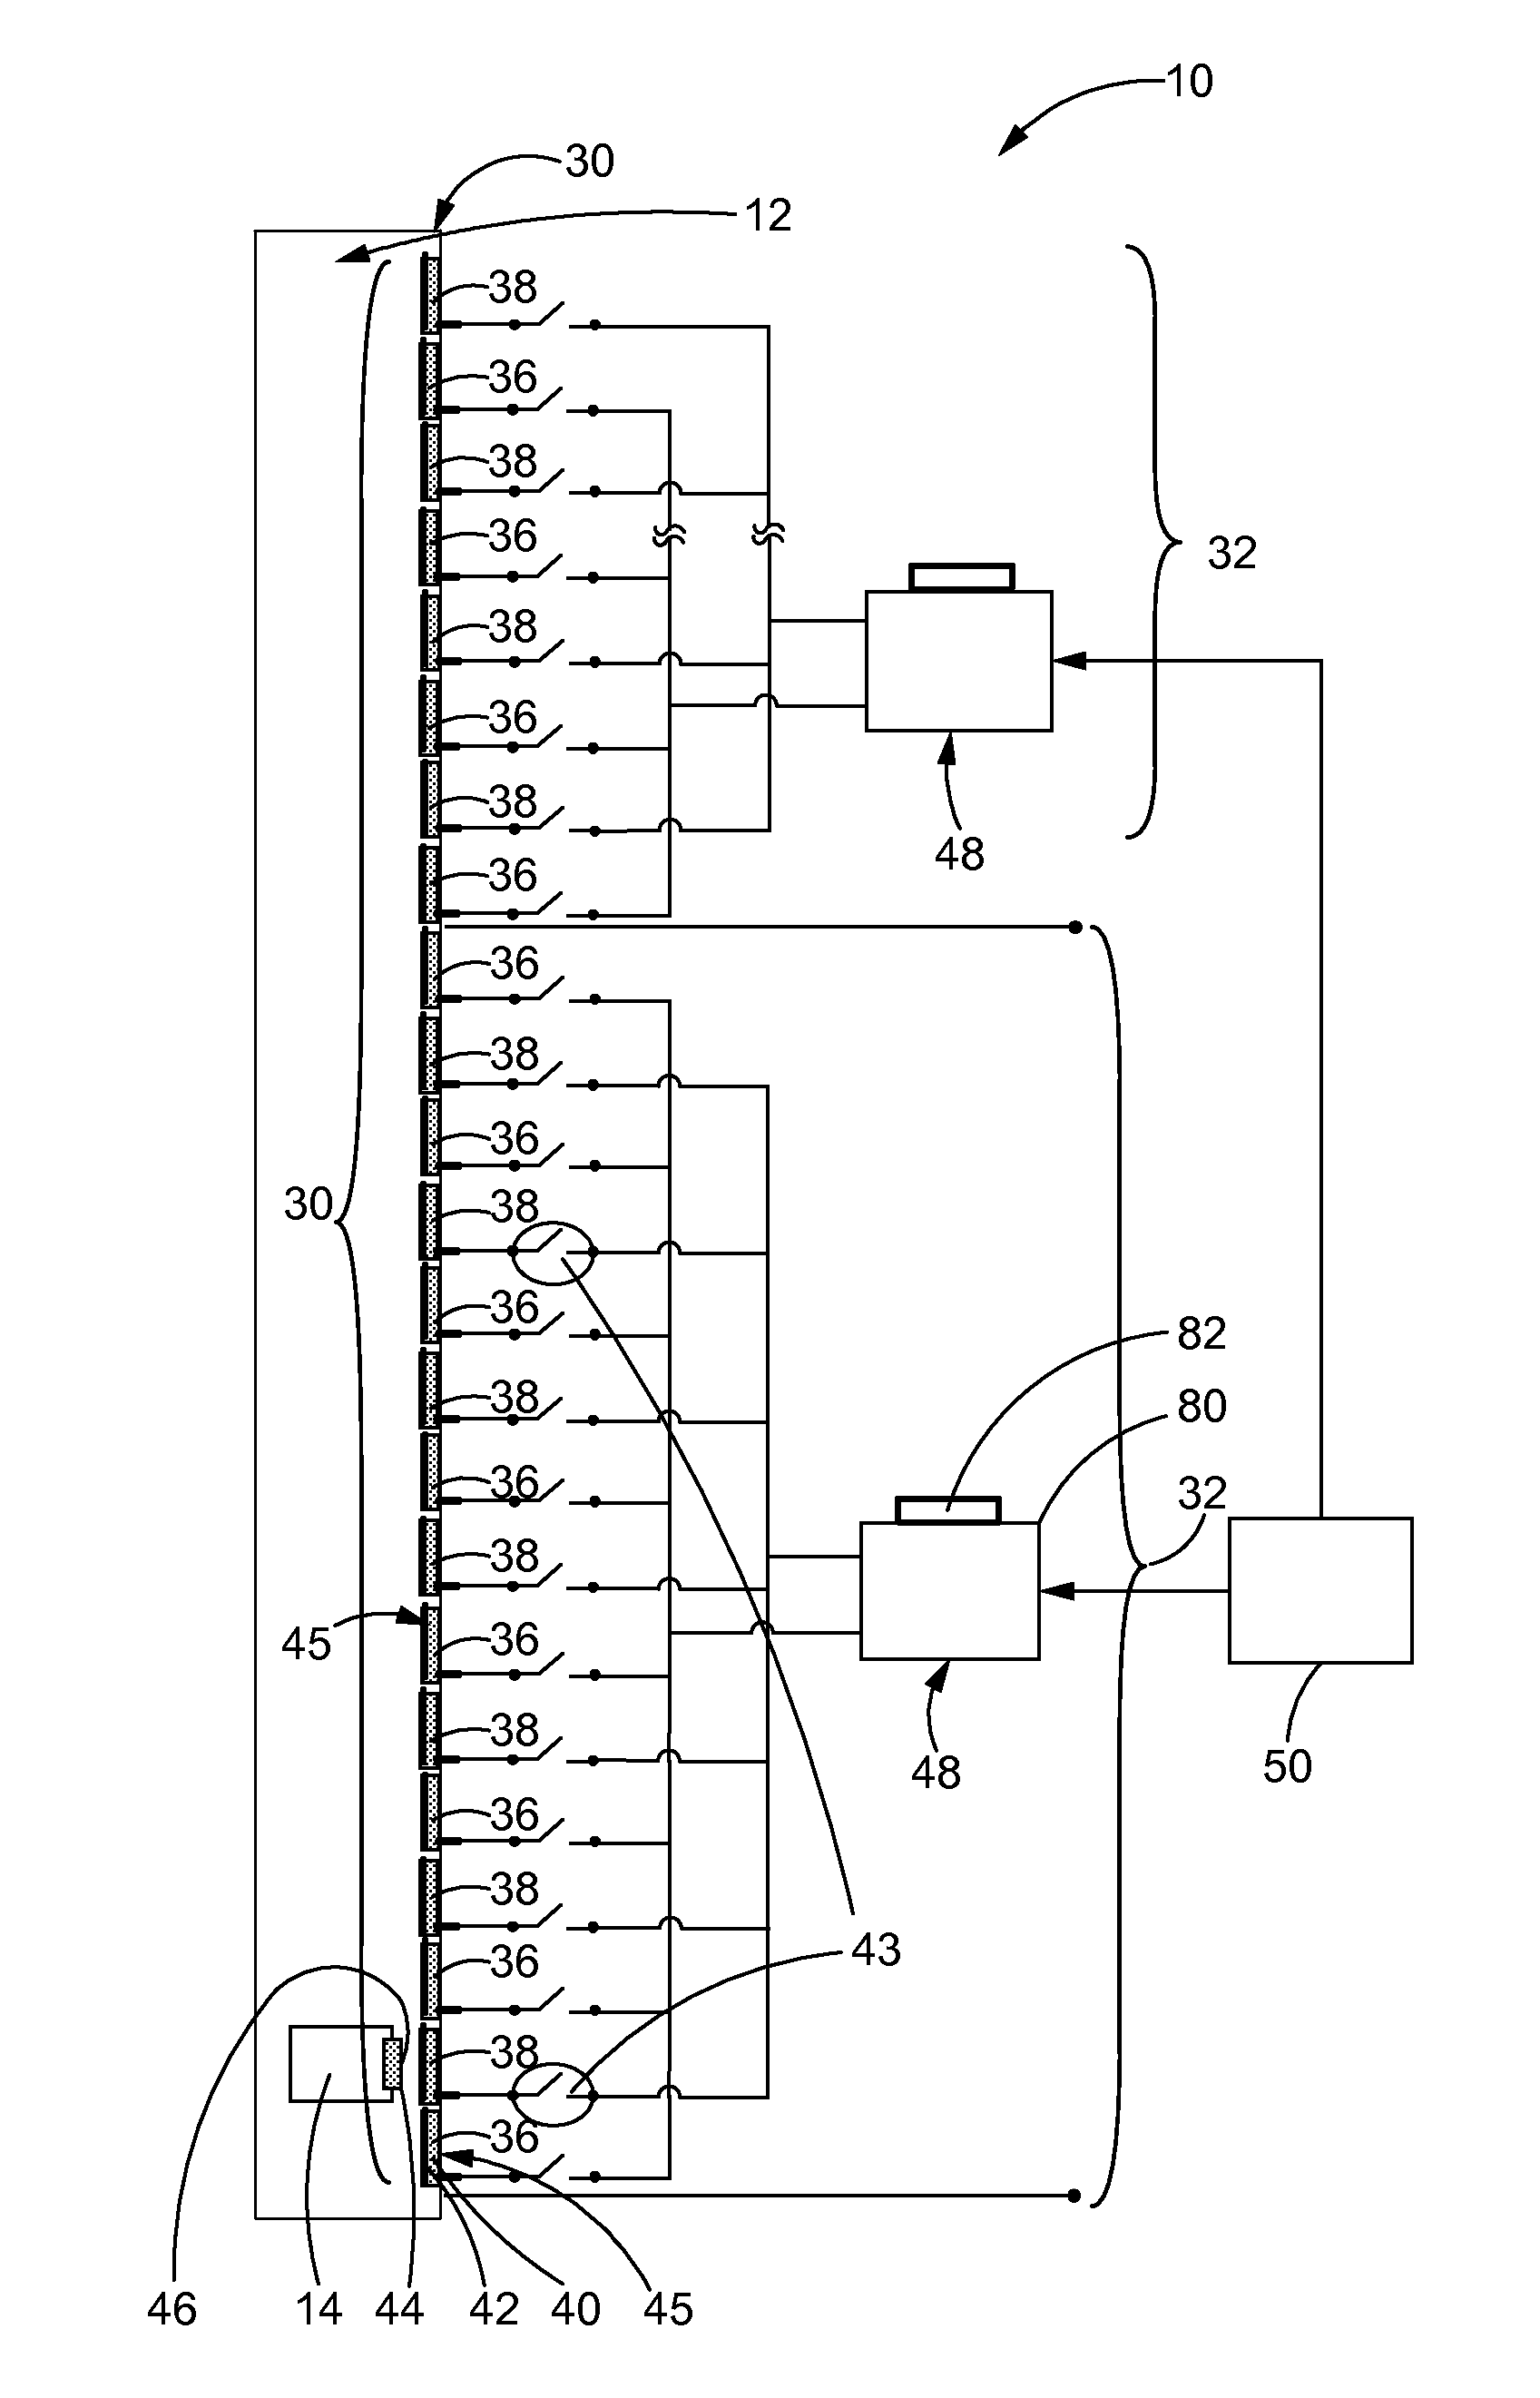 Motor drive for linear machines with distributed windings